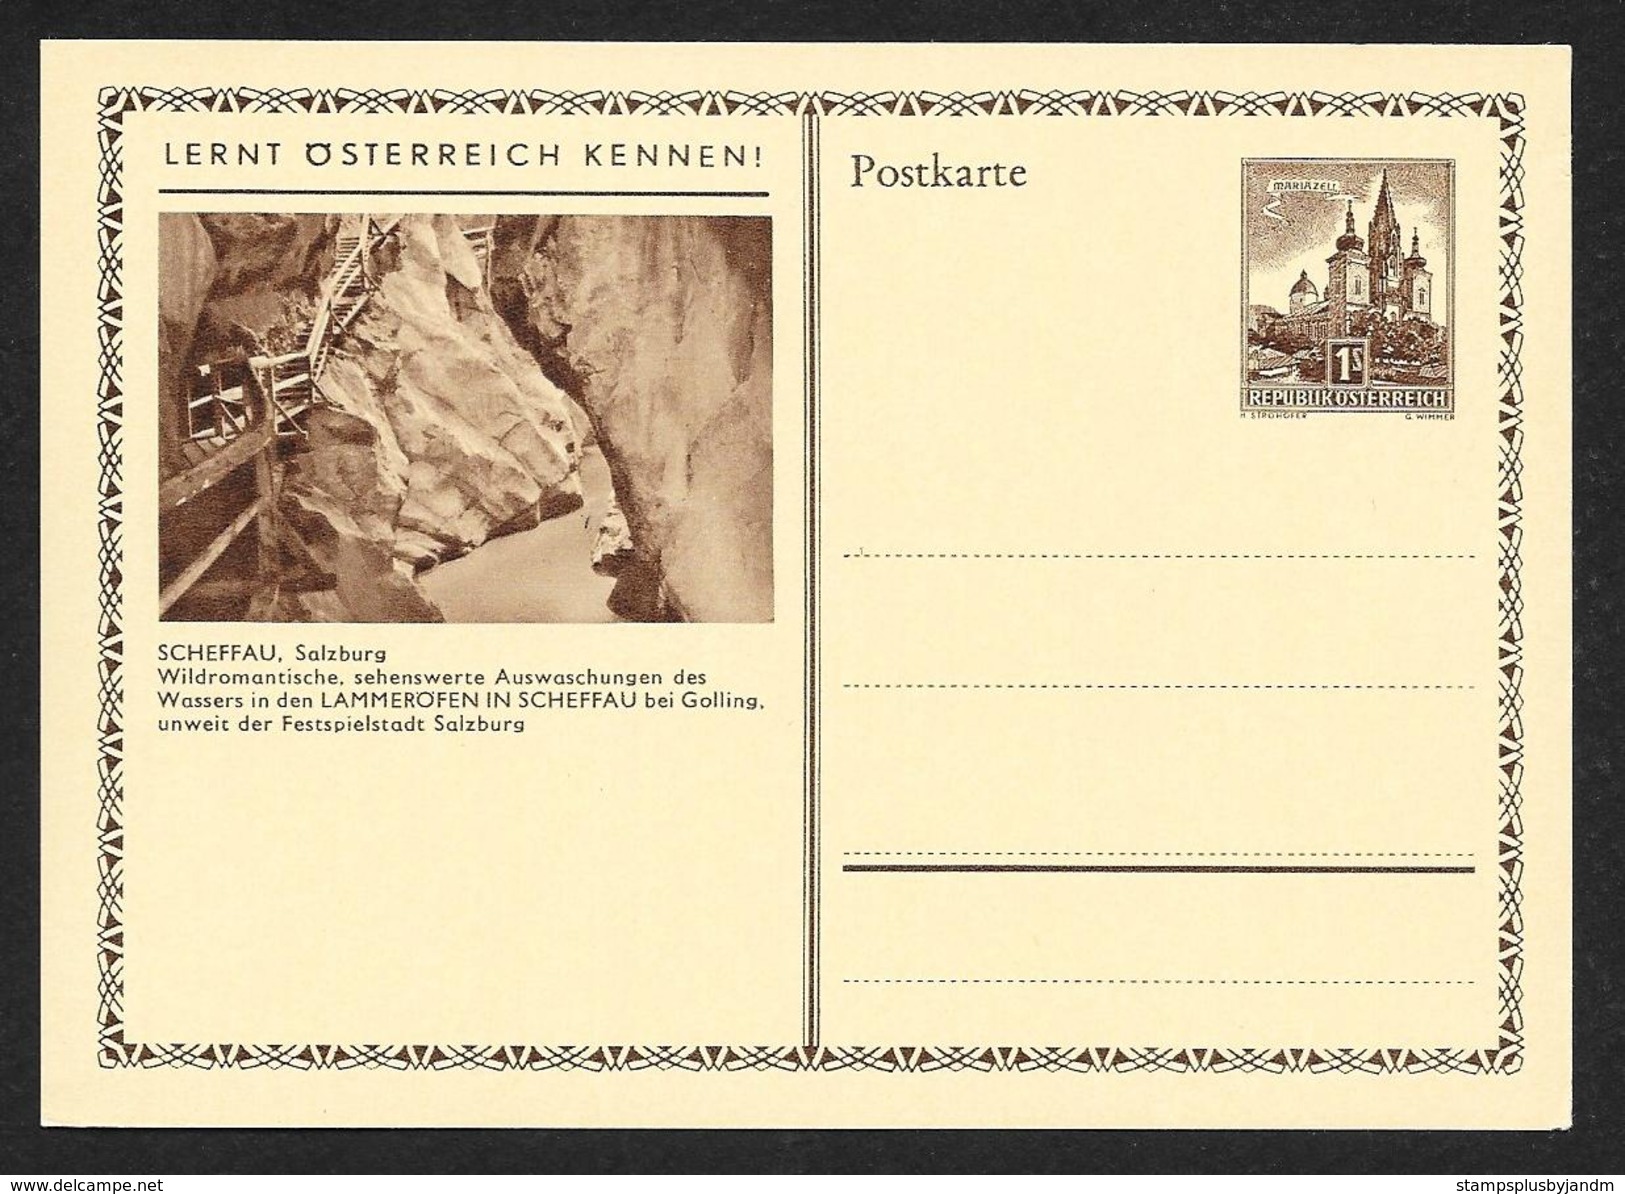 AUSTRIA (105) View Postal Cards Almost All Different Scenes Unused c1950s STK#A10001//A10110